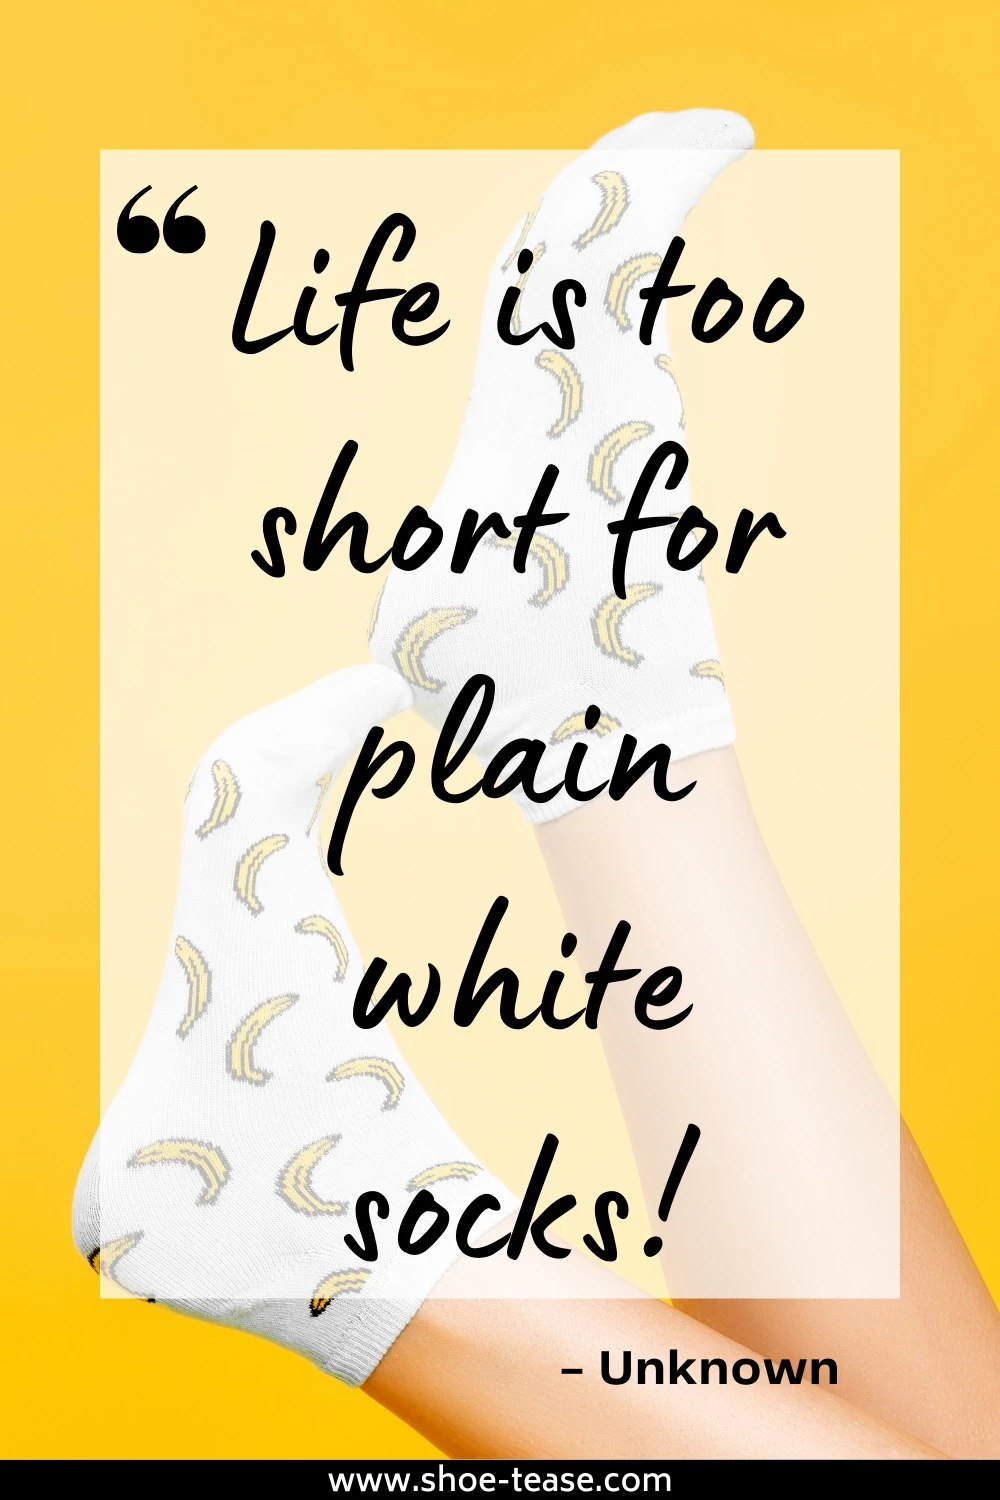 Text reading Life is too short for plain white socks unknown over cropped view of feet wearing white socks with yellow bananas.